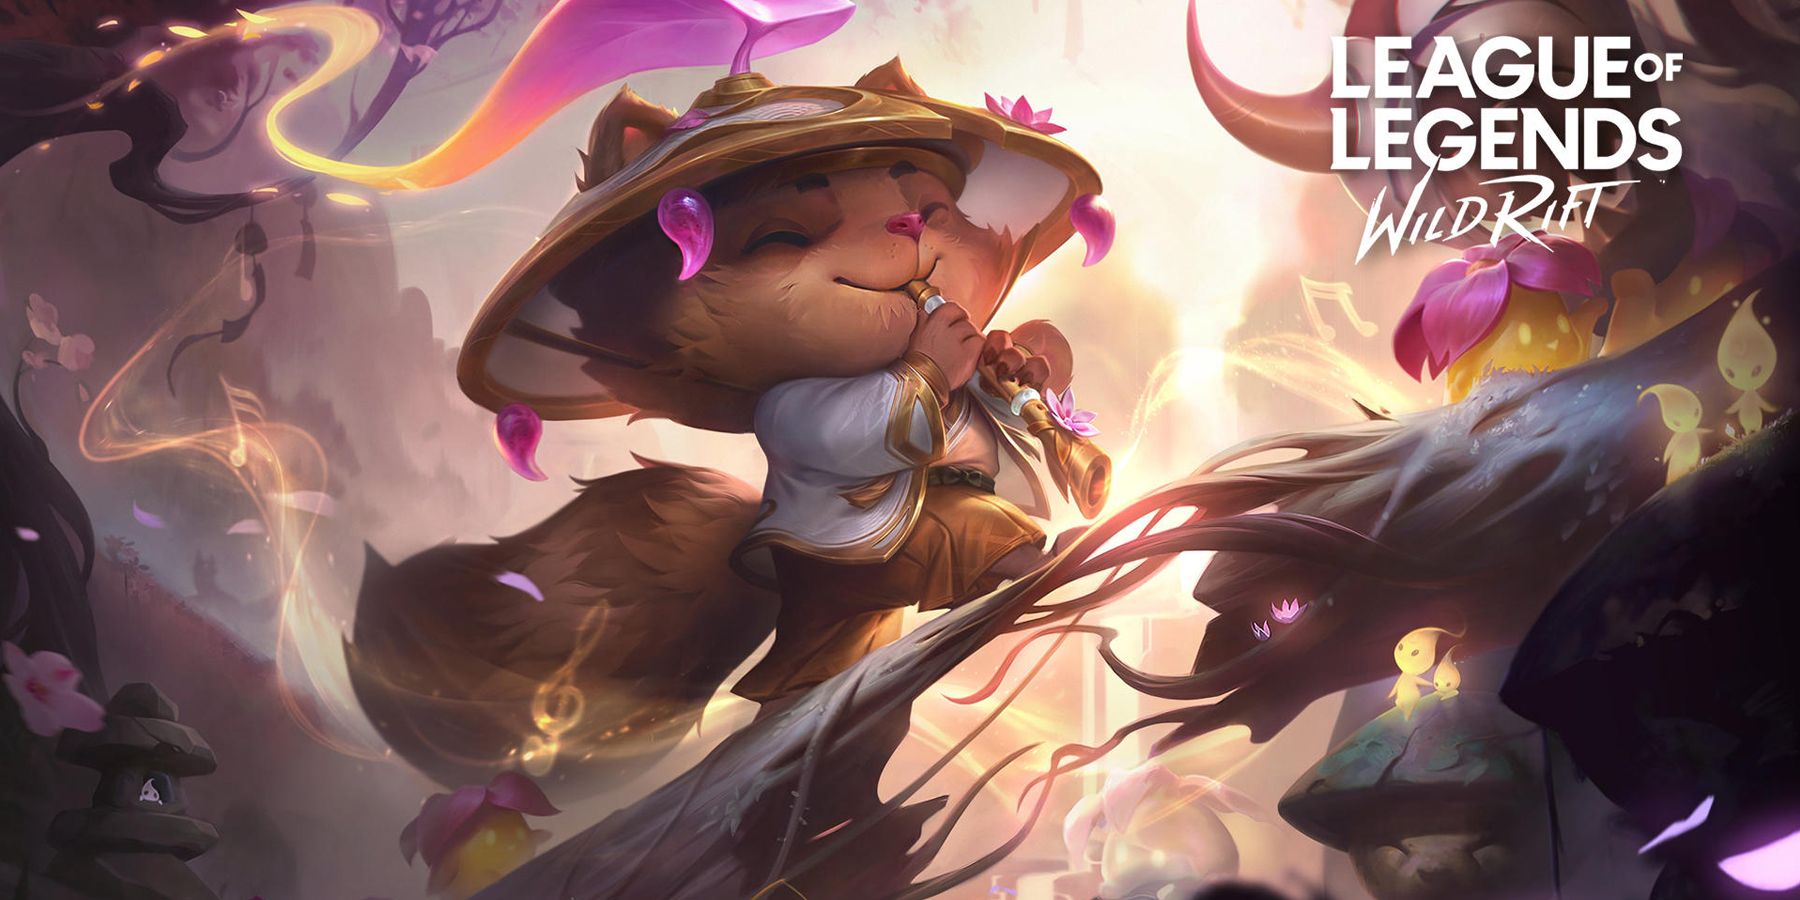 Teemo in promo art for League of Legends: Wild Rift.